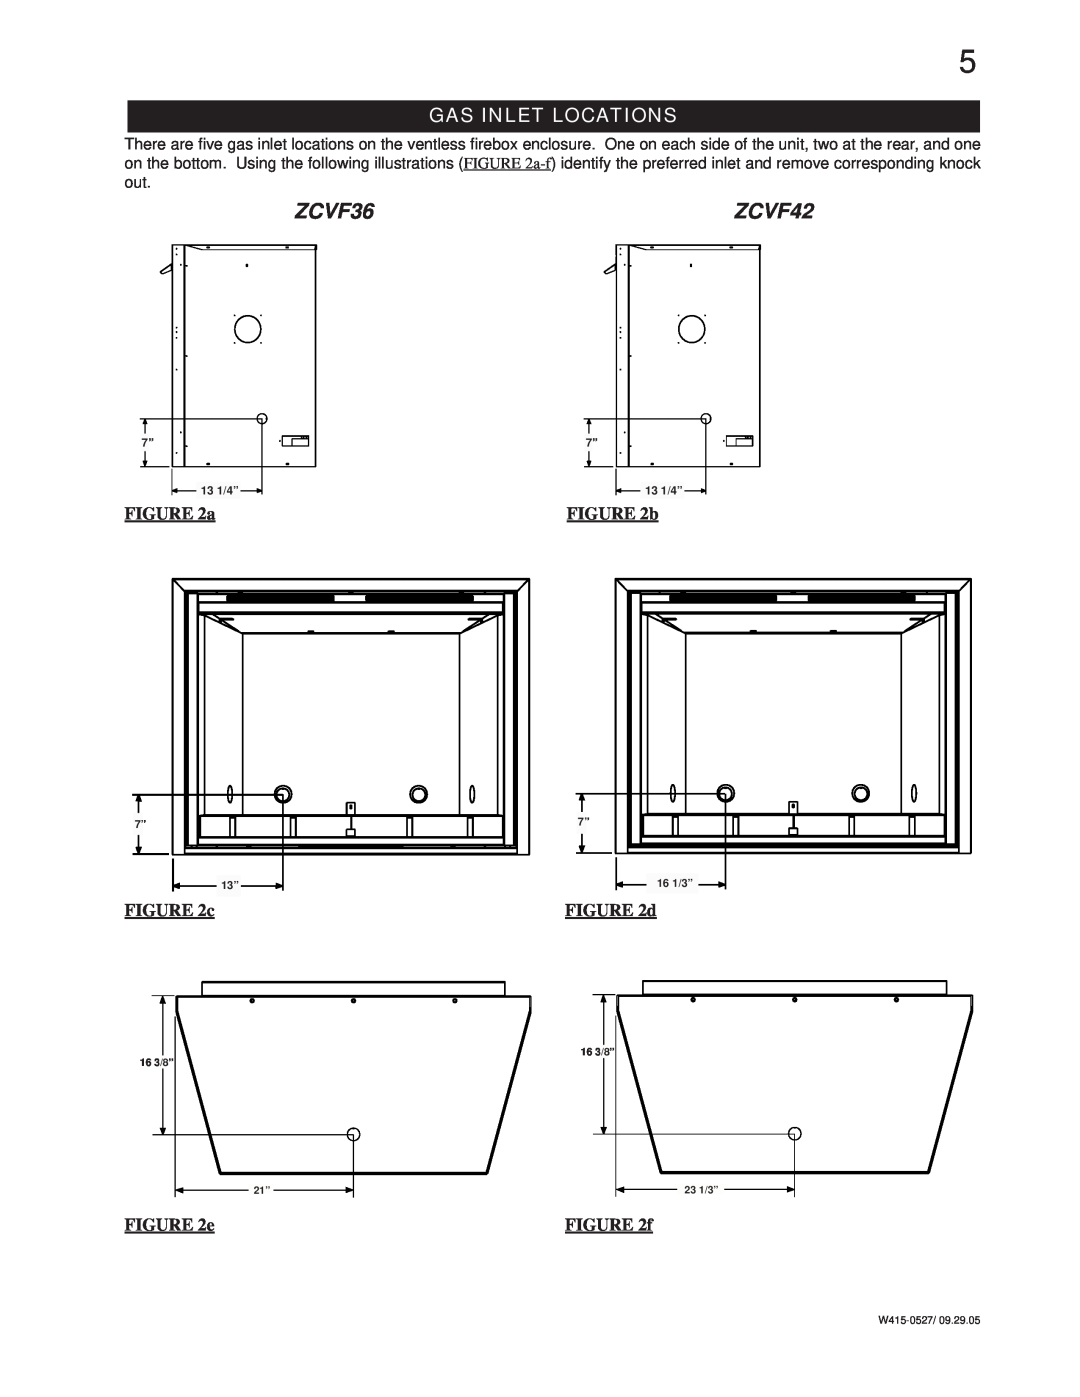 Napoleon Fireplaces ZCVF36 installation instructions Gas Inlet Locations, ZCVF42, b, d, f 